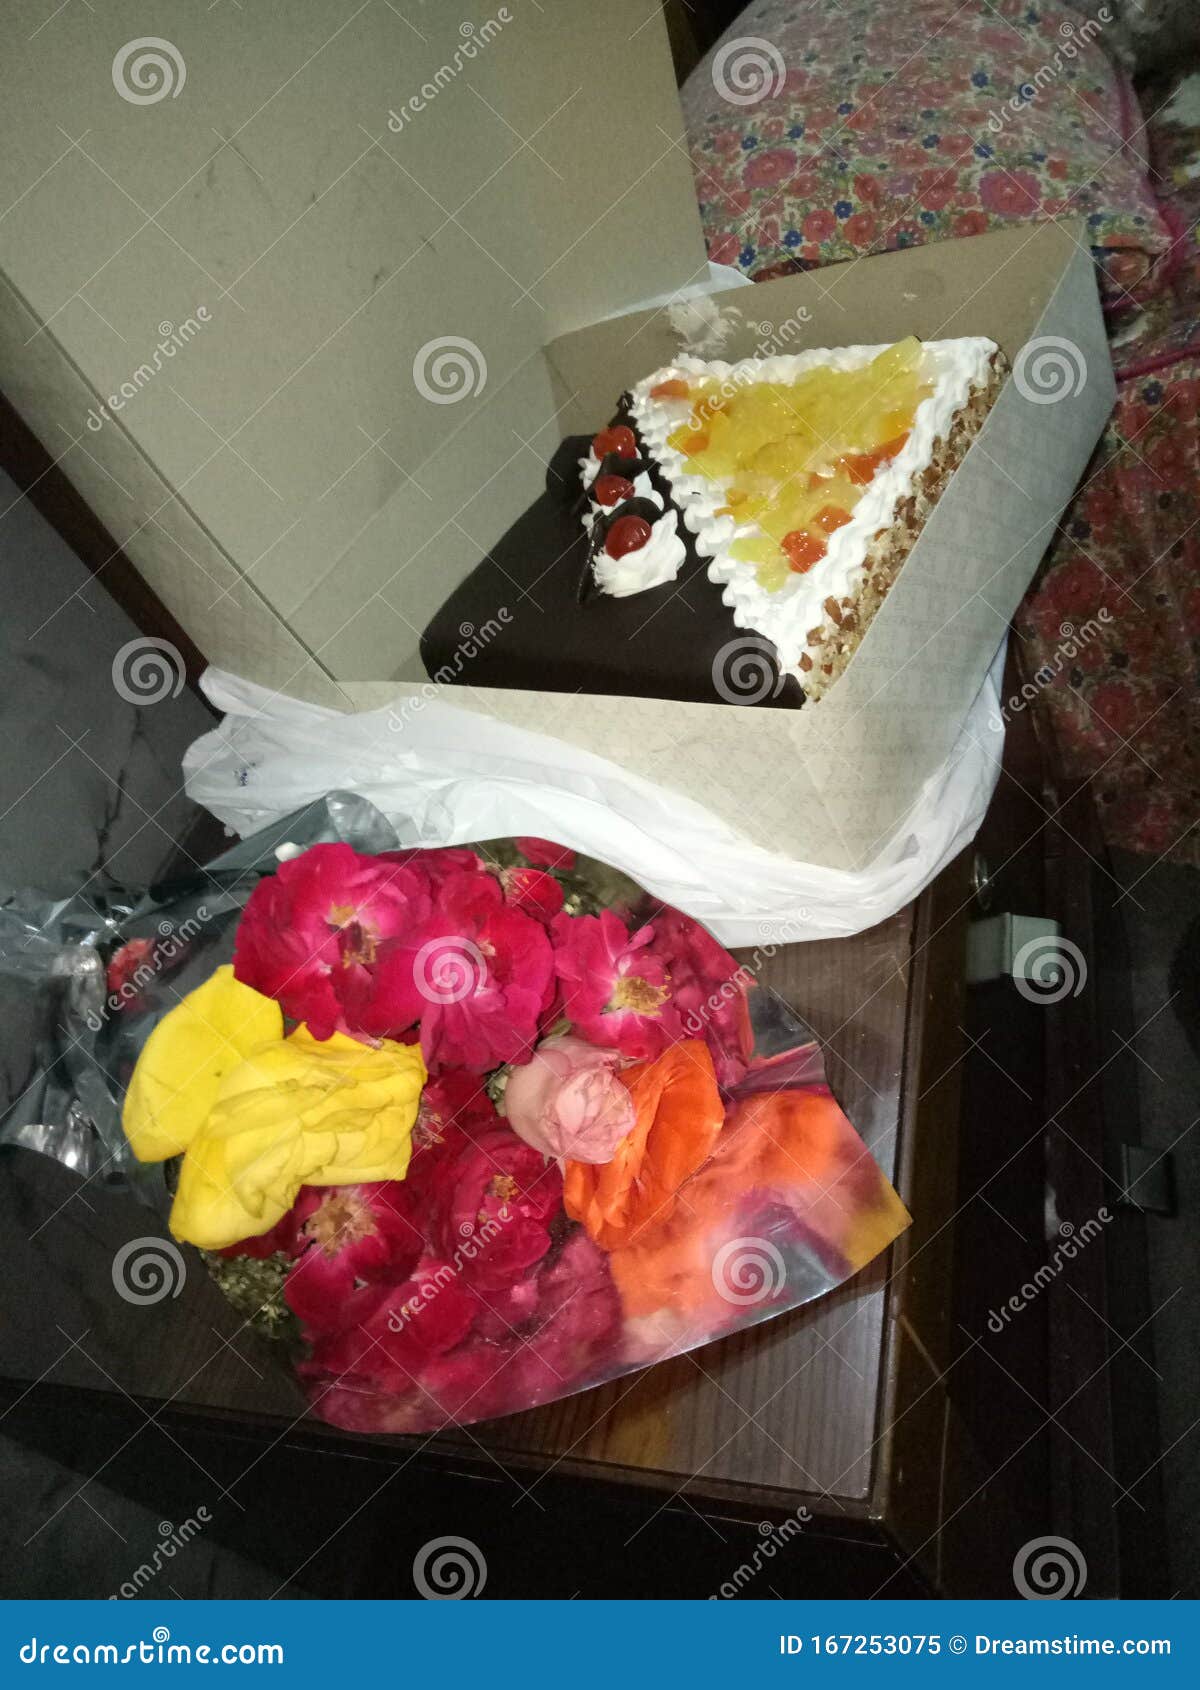 wellcome your birthday with flowers they are all different in colours